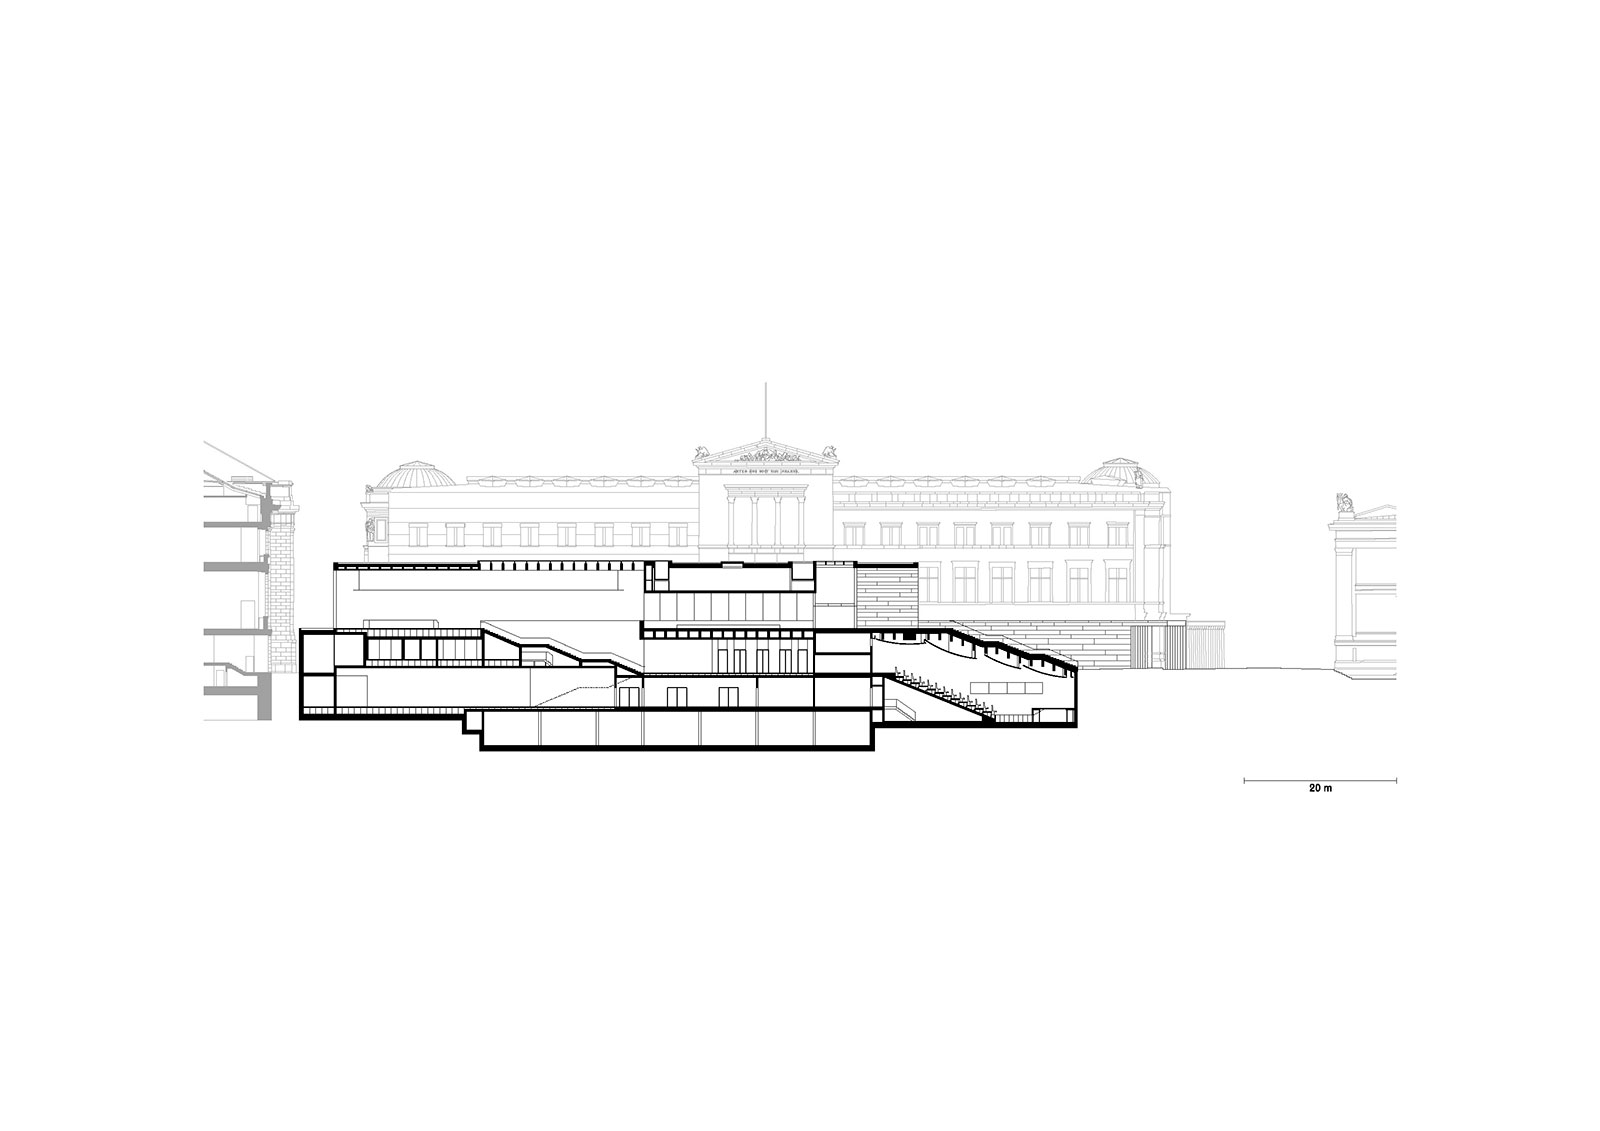 James Simon Galerie Germany David Chipperfield Architects Berlin drawing courtesy of David Chipperfield Architects